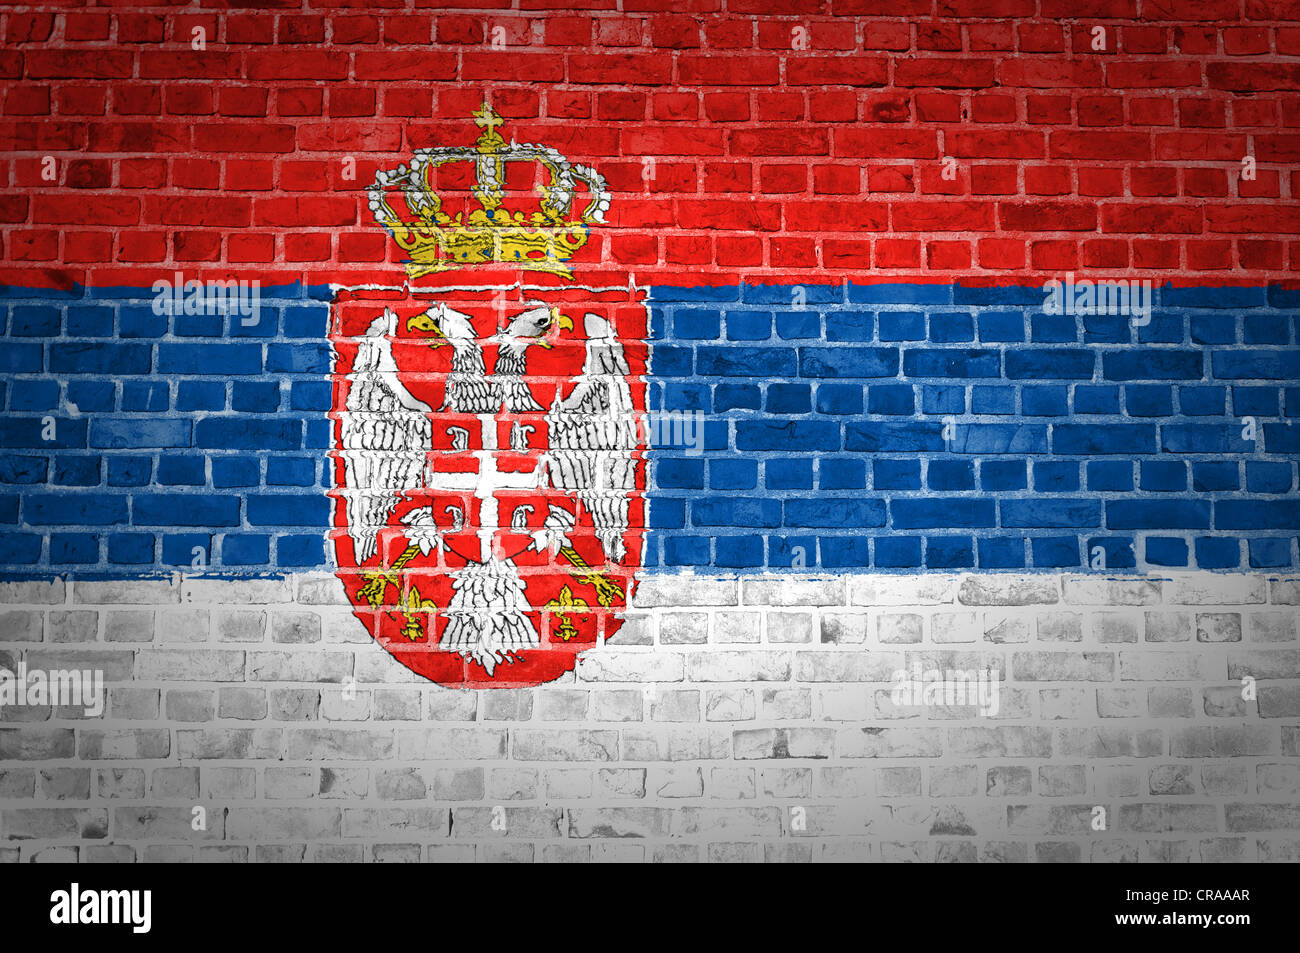 An image of the Serbia flag painted on a brick wall in an urban location Stock Photo